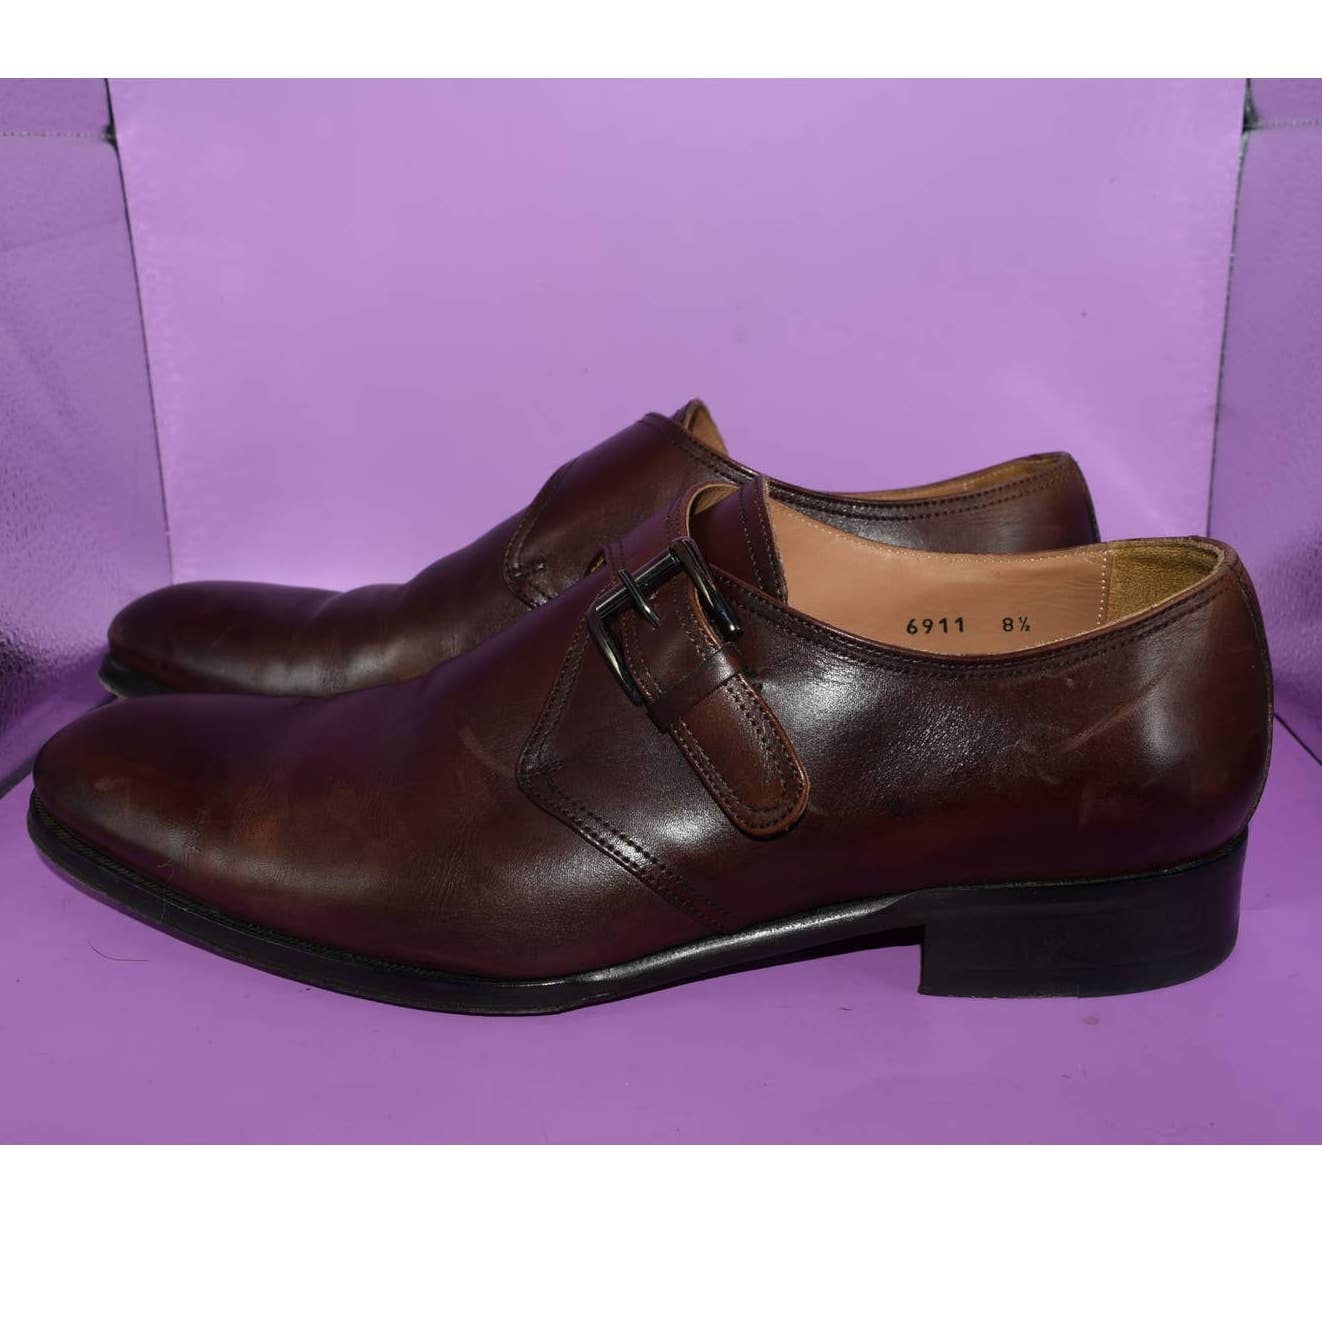 To Boot New York Adam Derrick Brown Leather Monk Strap Shoes - 8.5